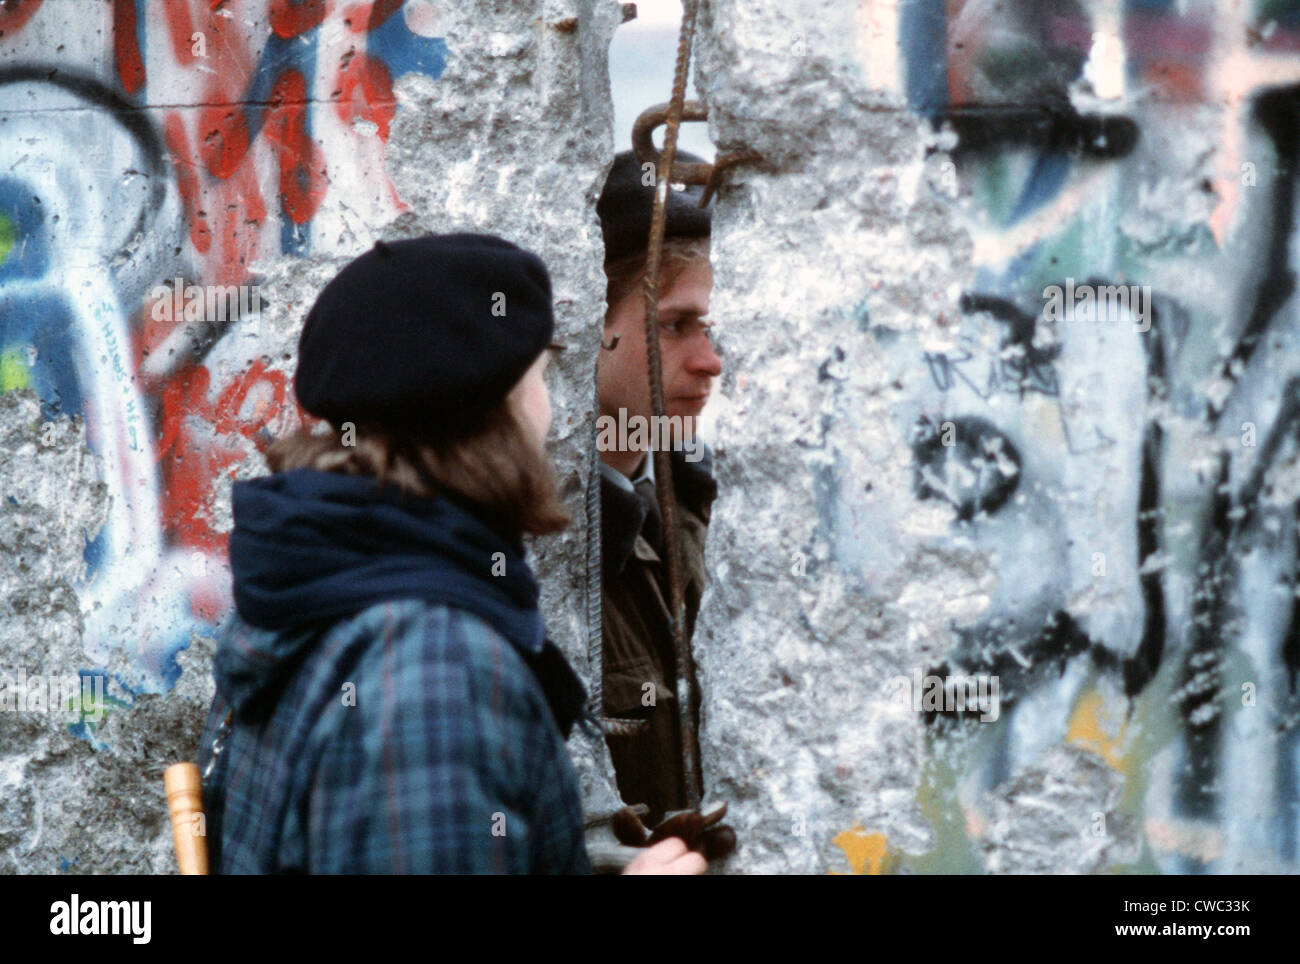 A young West German woman speaks with an East German guard through an opening in the Berlin Wall. Dec. 21 1989. Stock Photo